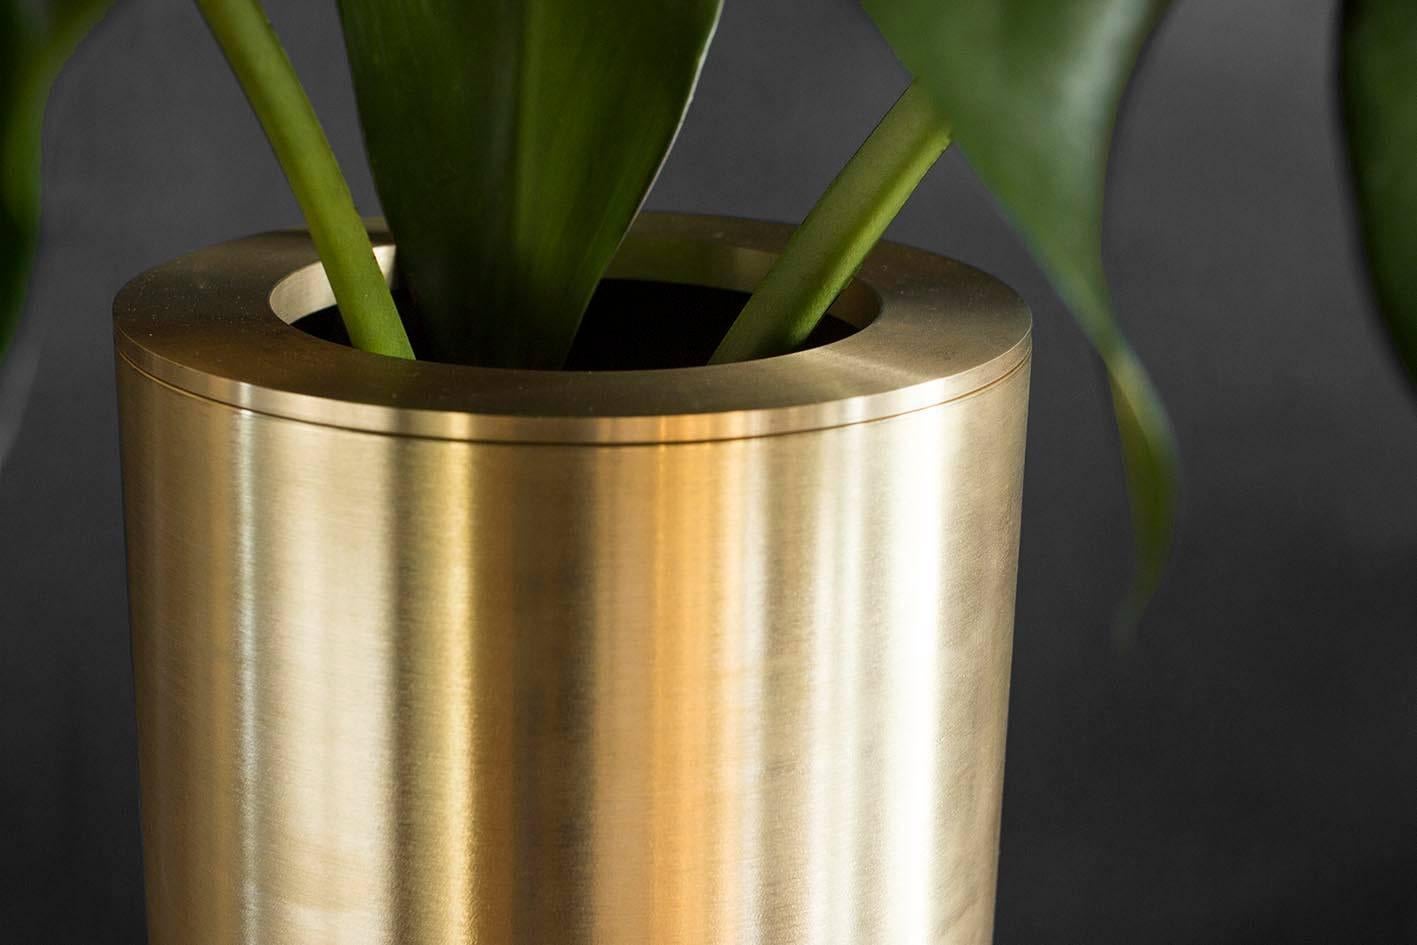 Cofete brass vase by Jan Garncarek
Dimensions: 60 x 18 x 18 cm
Material: Brass
Handcrafted by Jan Garncarek.
Signed 

Jan Garncarek is an important contemporary designer, graduated from the Academy of Fine Arts in Warsaw. He gained extra